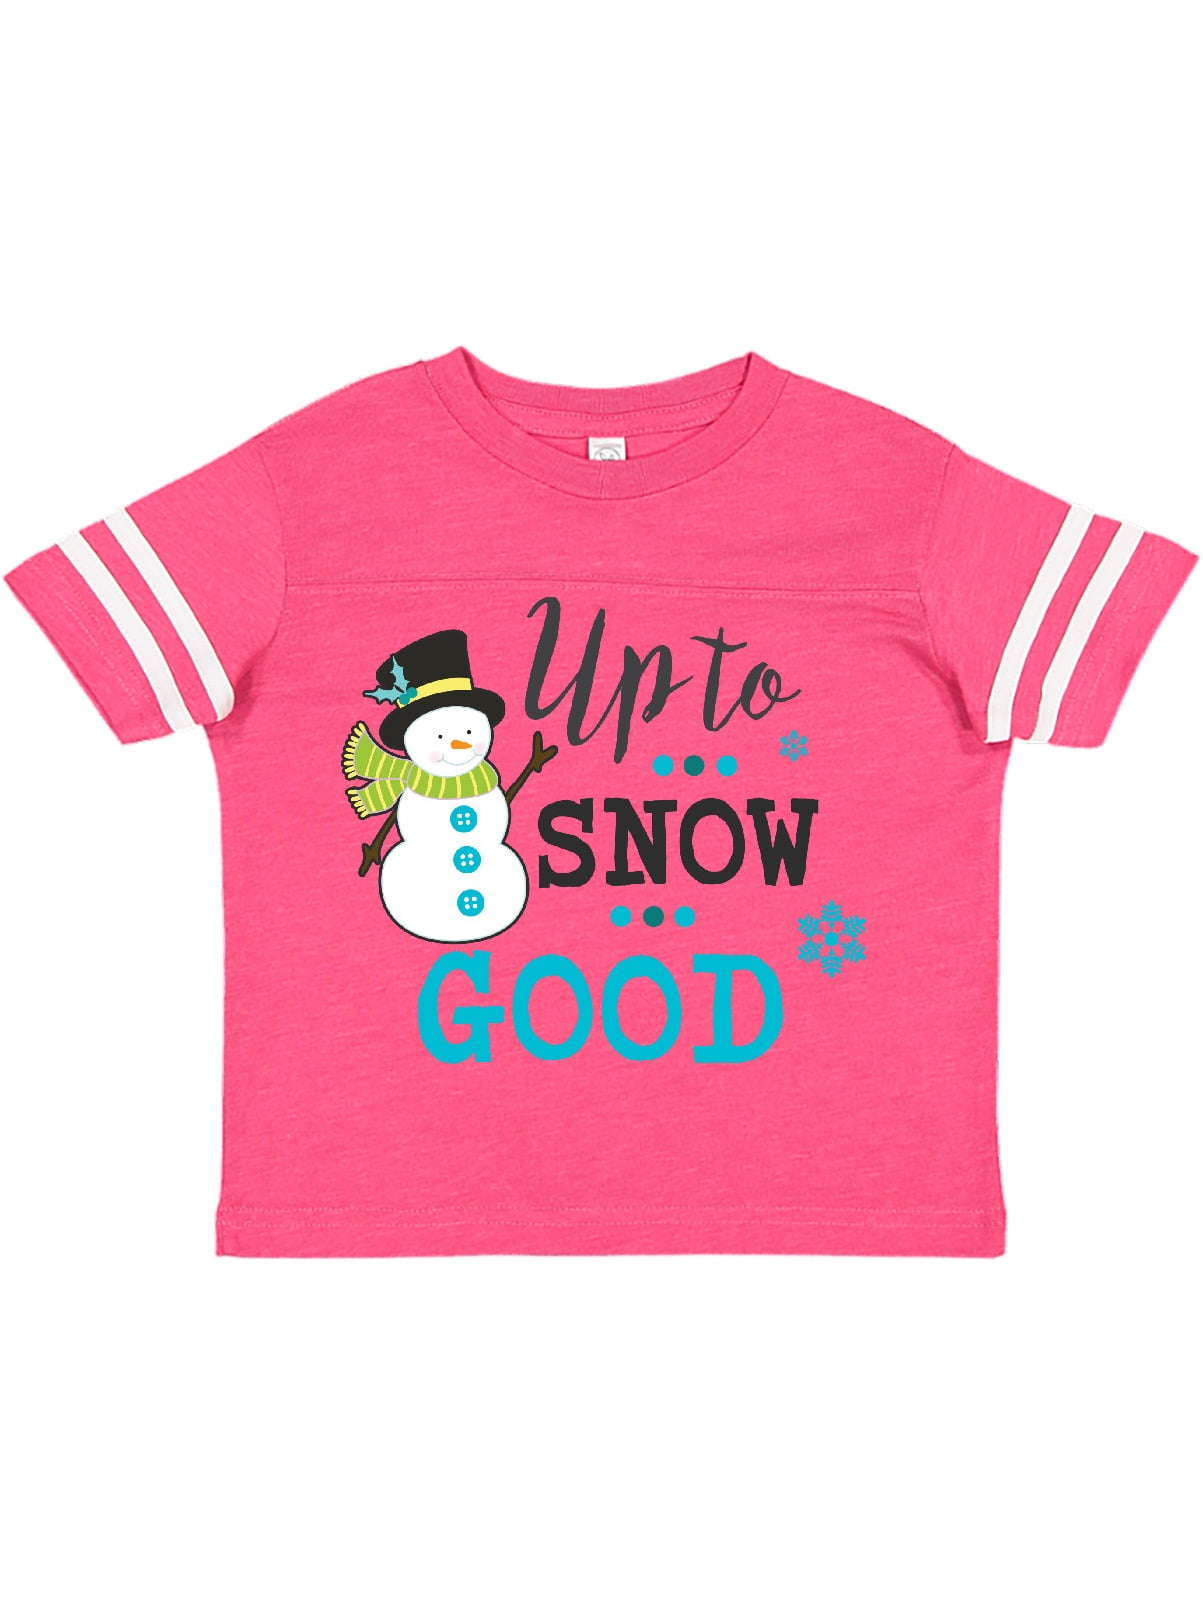 Girls T-Shirt Baby It's Cold Outside Snowflakes Holly Xmas Tree Kids Boys 